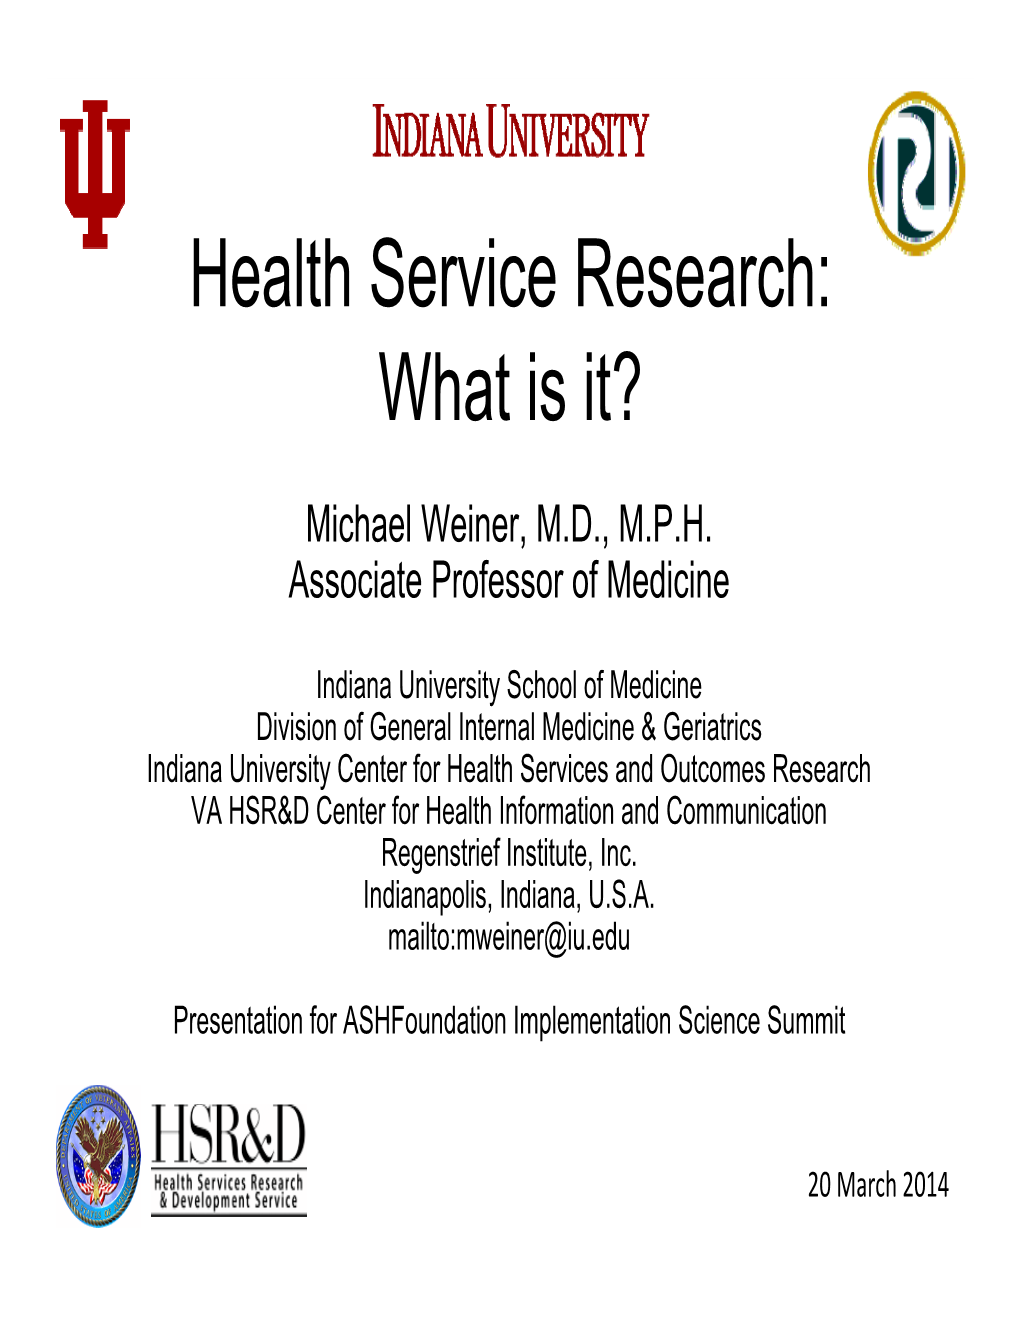 Health Services Research: What Is